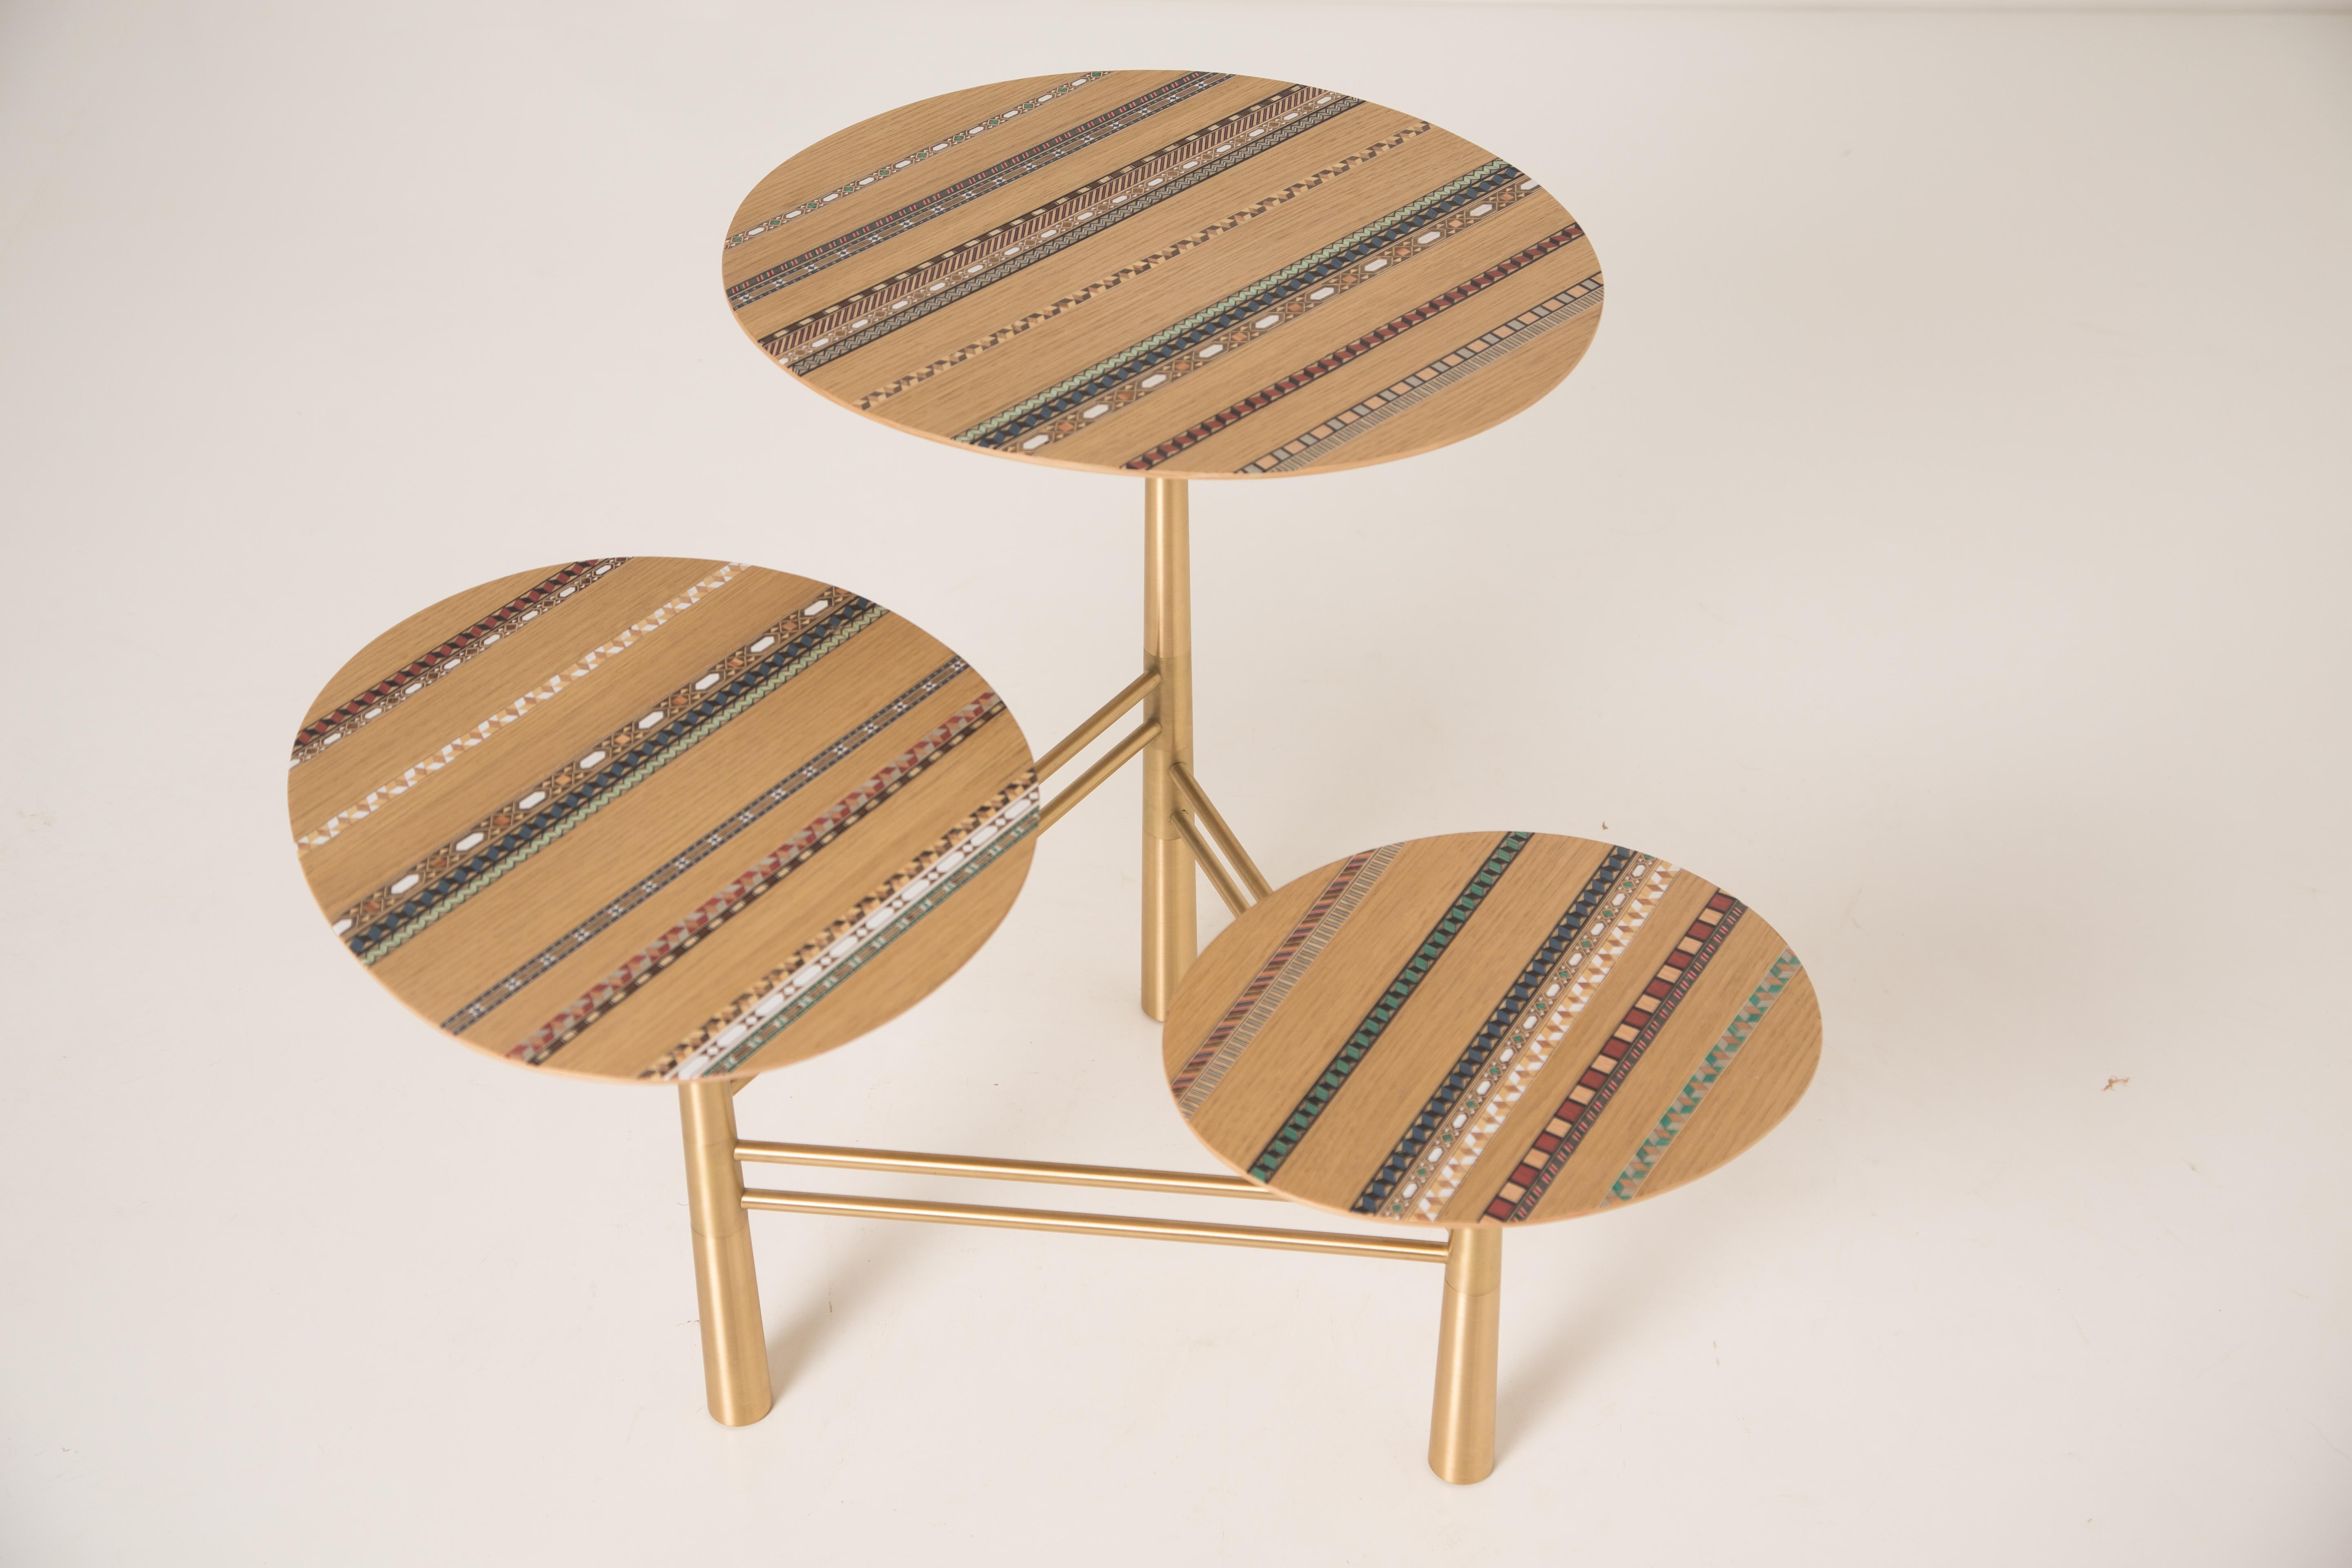 Funquetry Pebble Table with traditional Middle Eastern marquetry patterns (Libanesisch) im Angebot